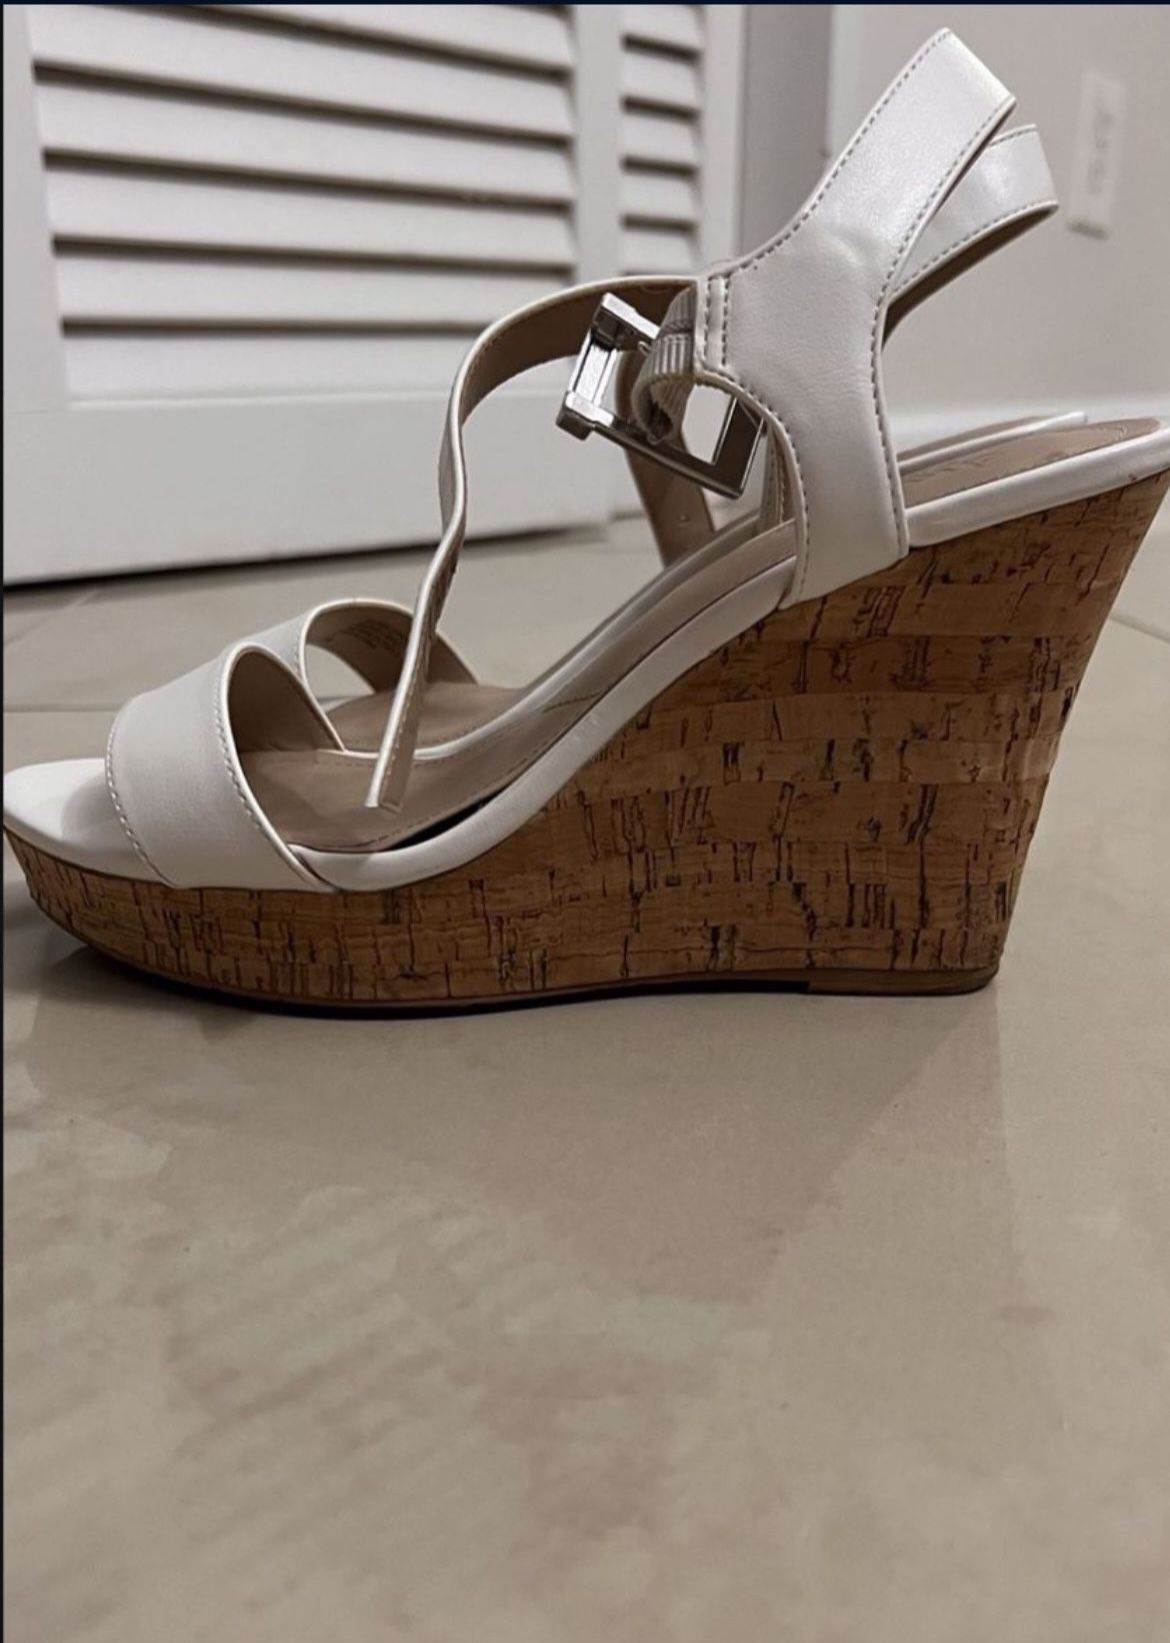 Charles By Charles David sandals  White color  Cork Wedge 3.75”  Size 7.5  Excellent condition